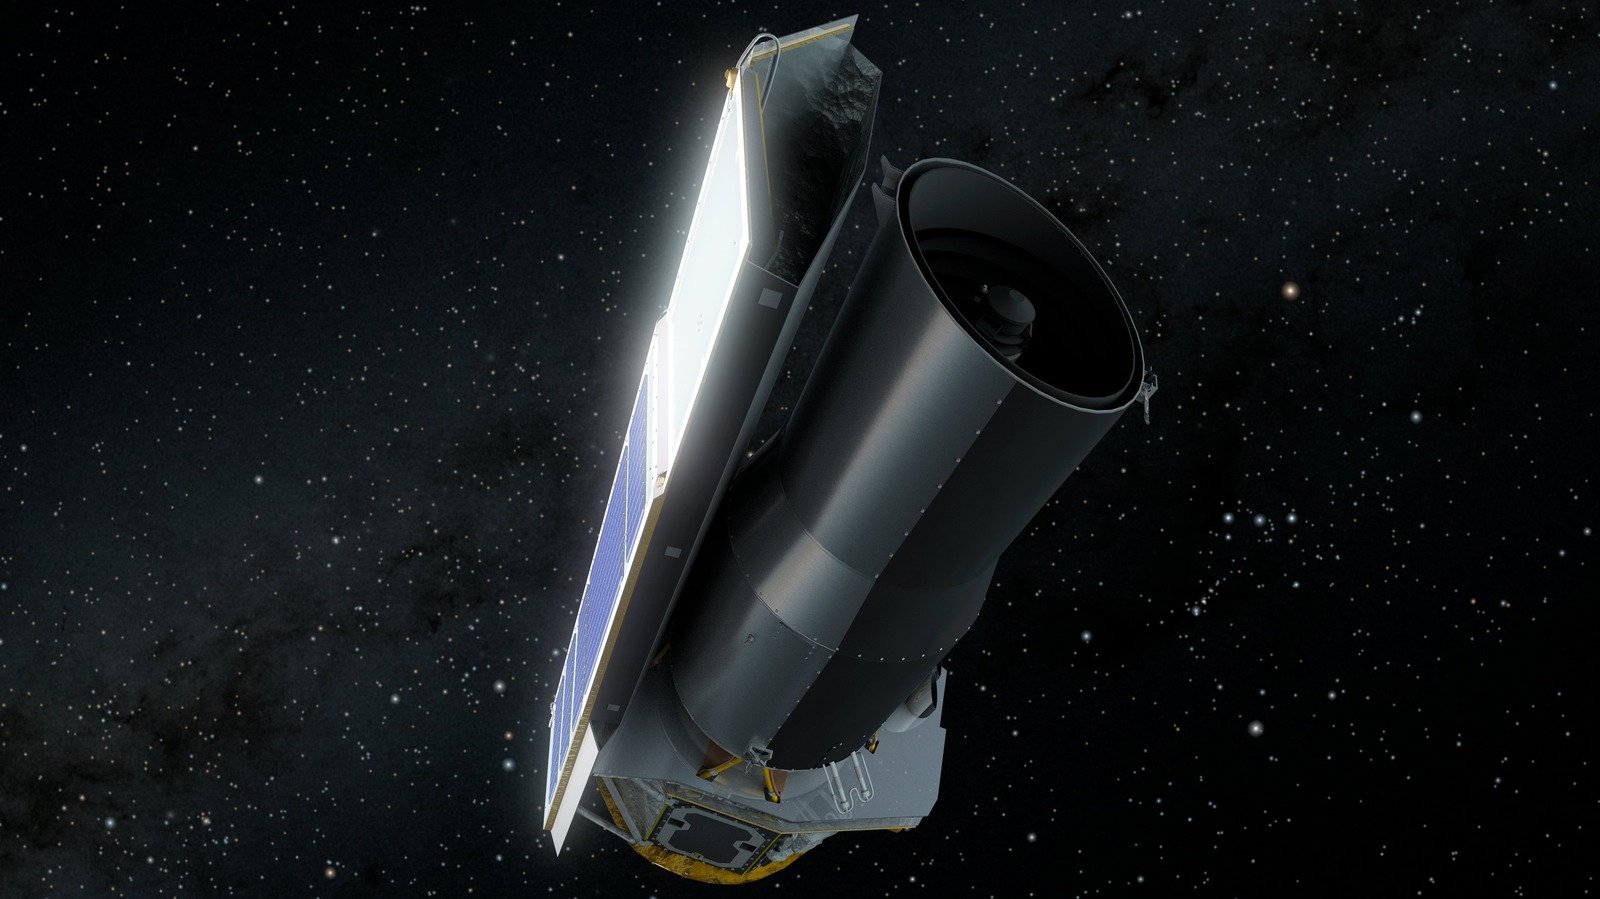 Whatever Happened To The Spitzer Space Telescope?